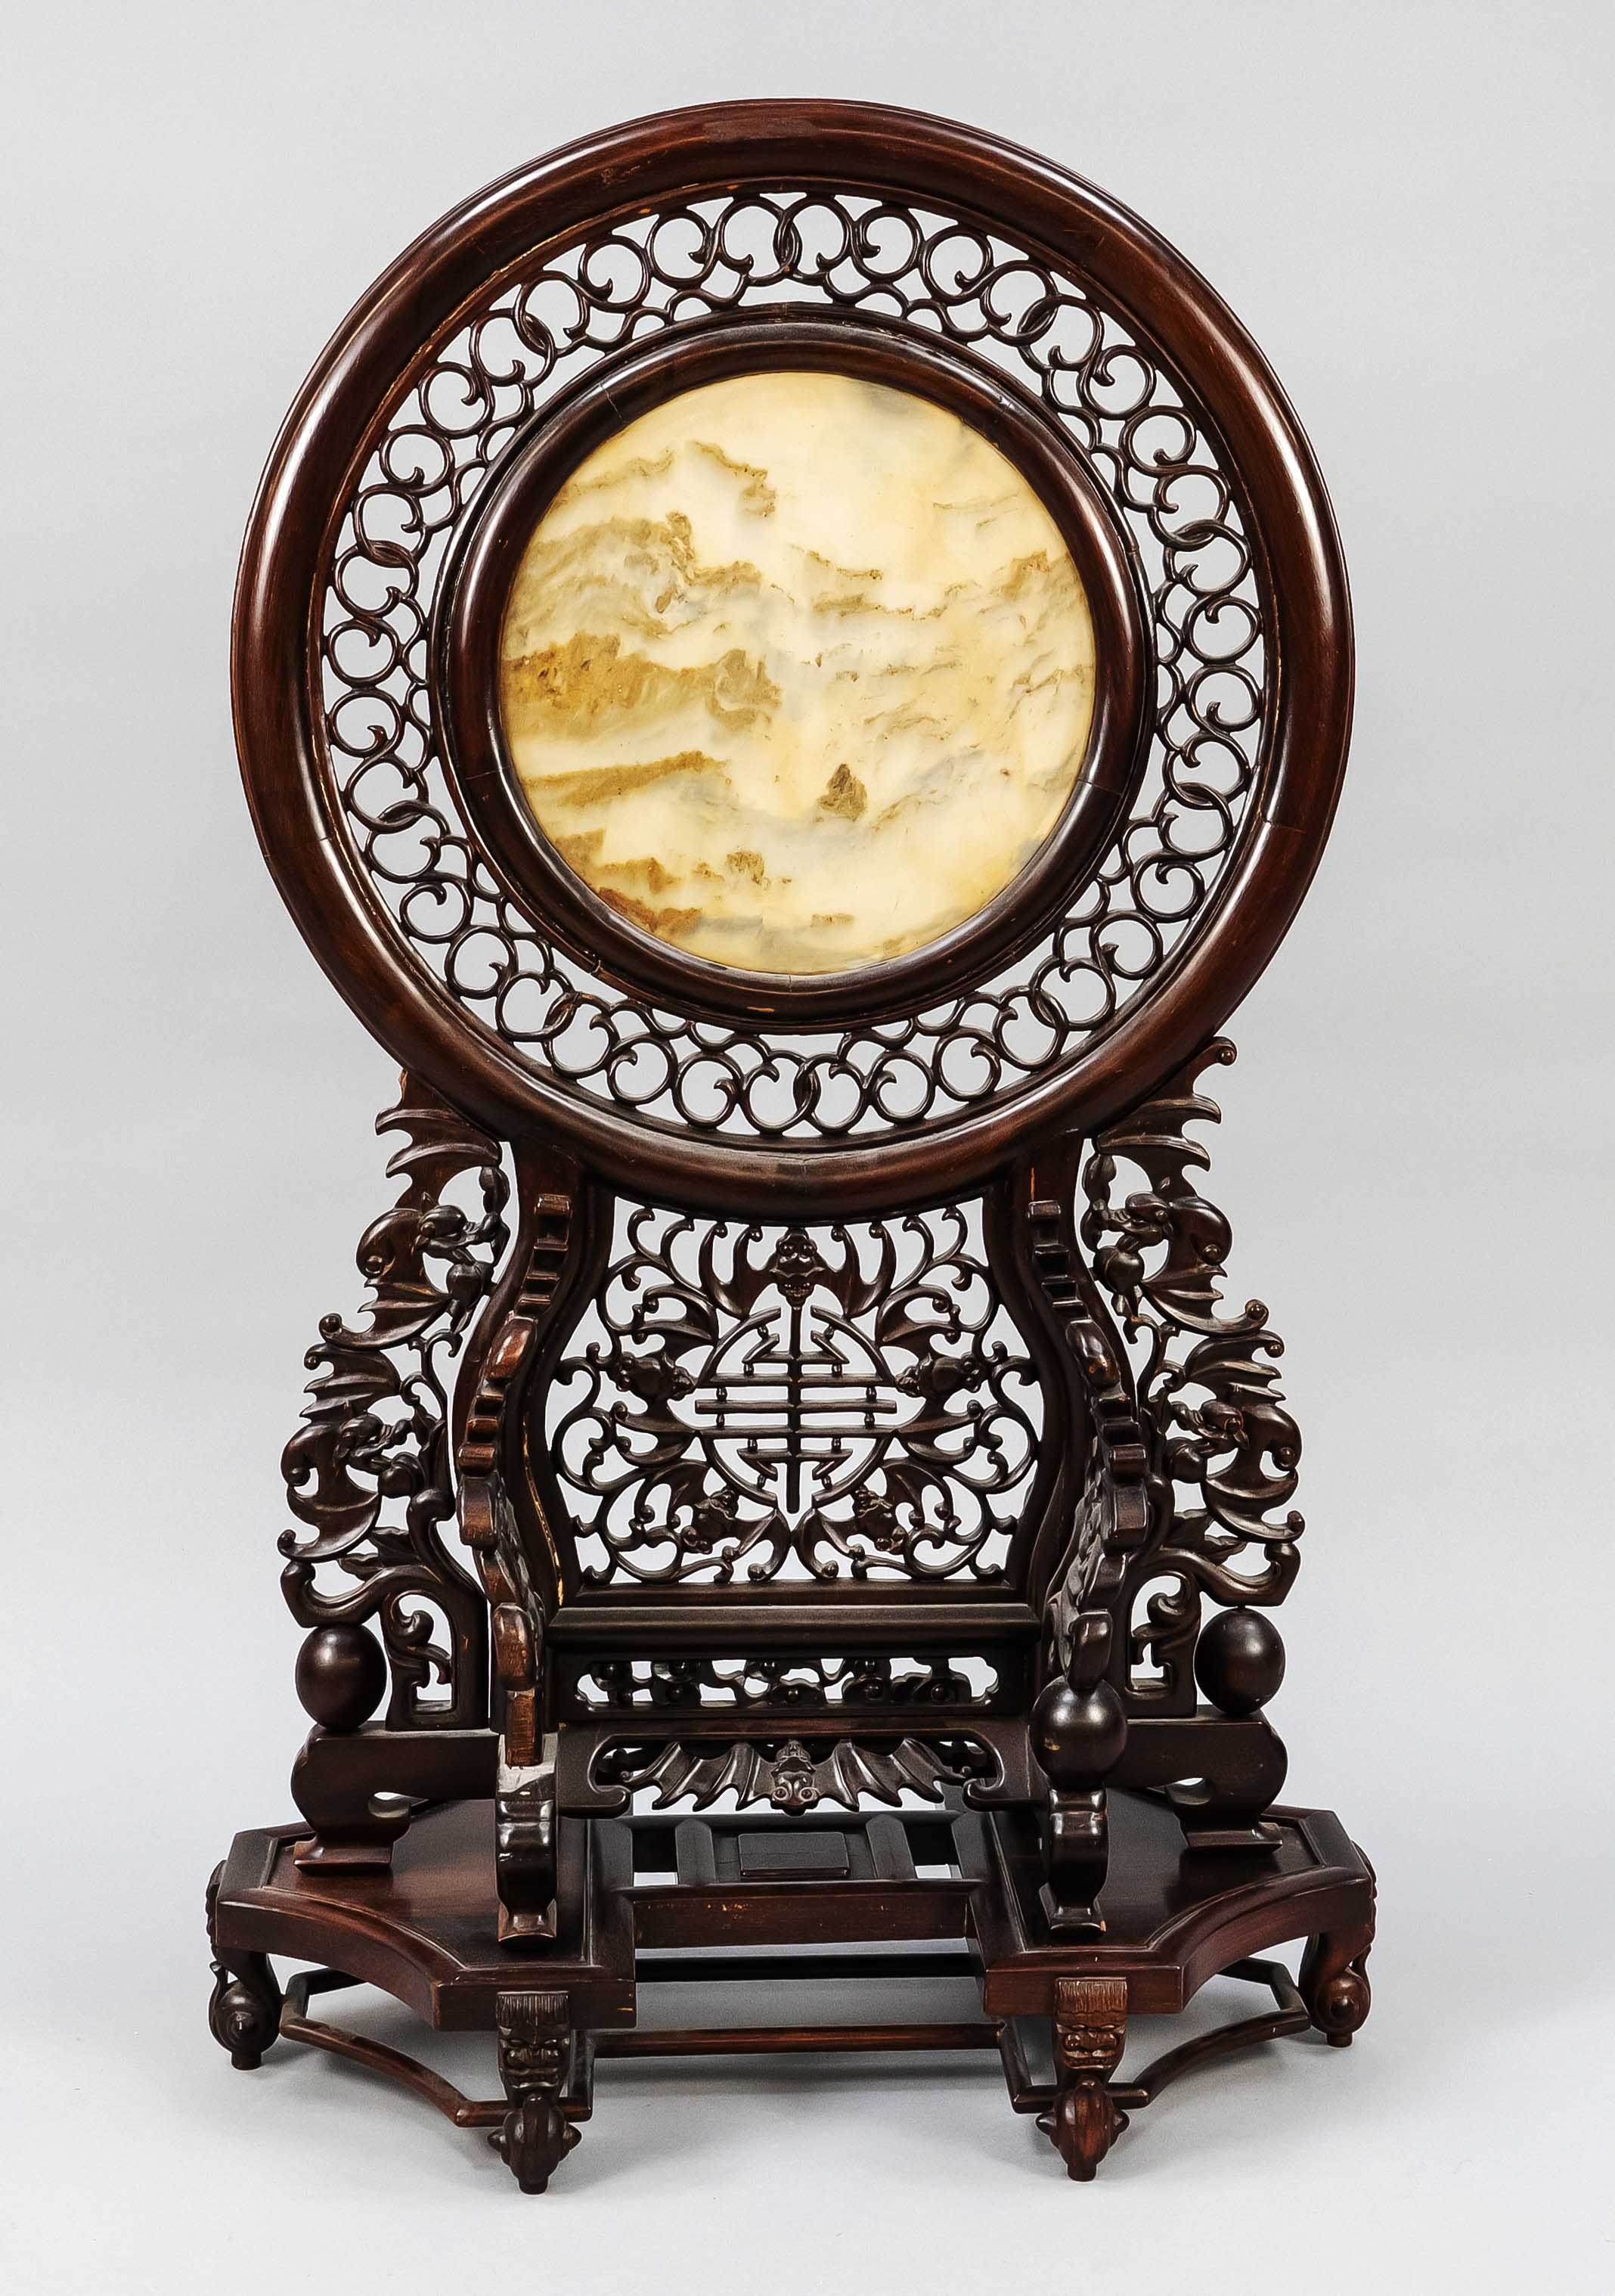 Large dreamstone, China, Qing dynasty(1644-1911), 18th/19th c., in ornately carved rosewood stand